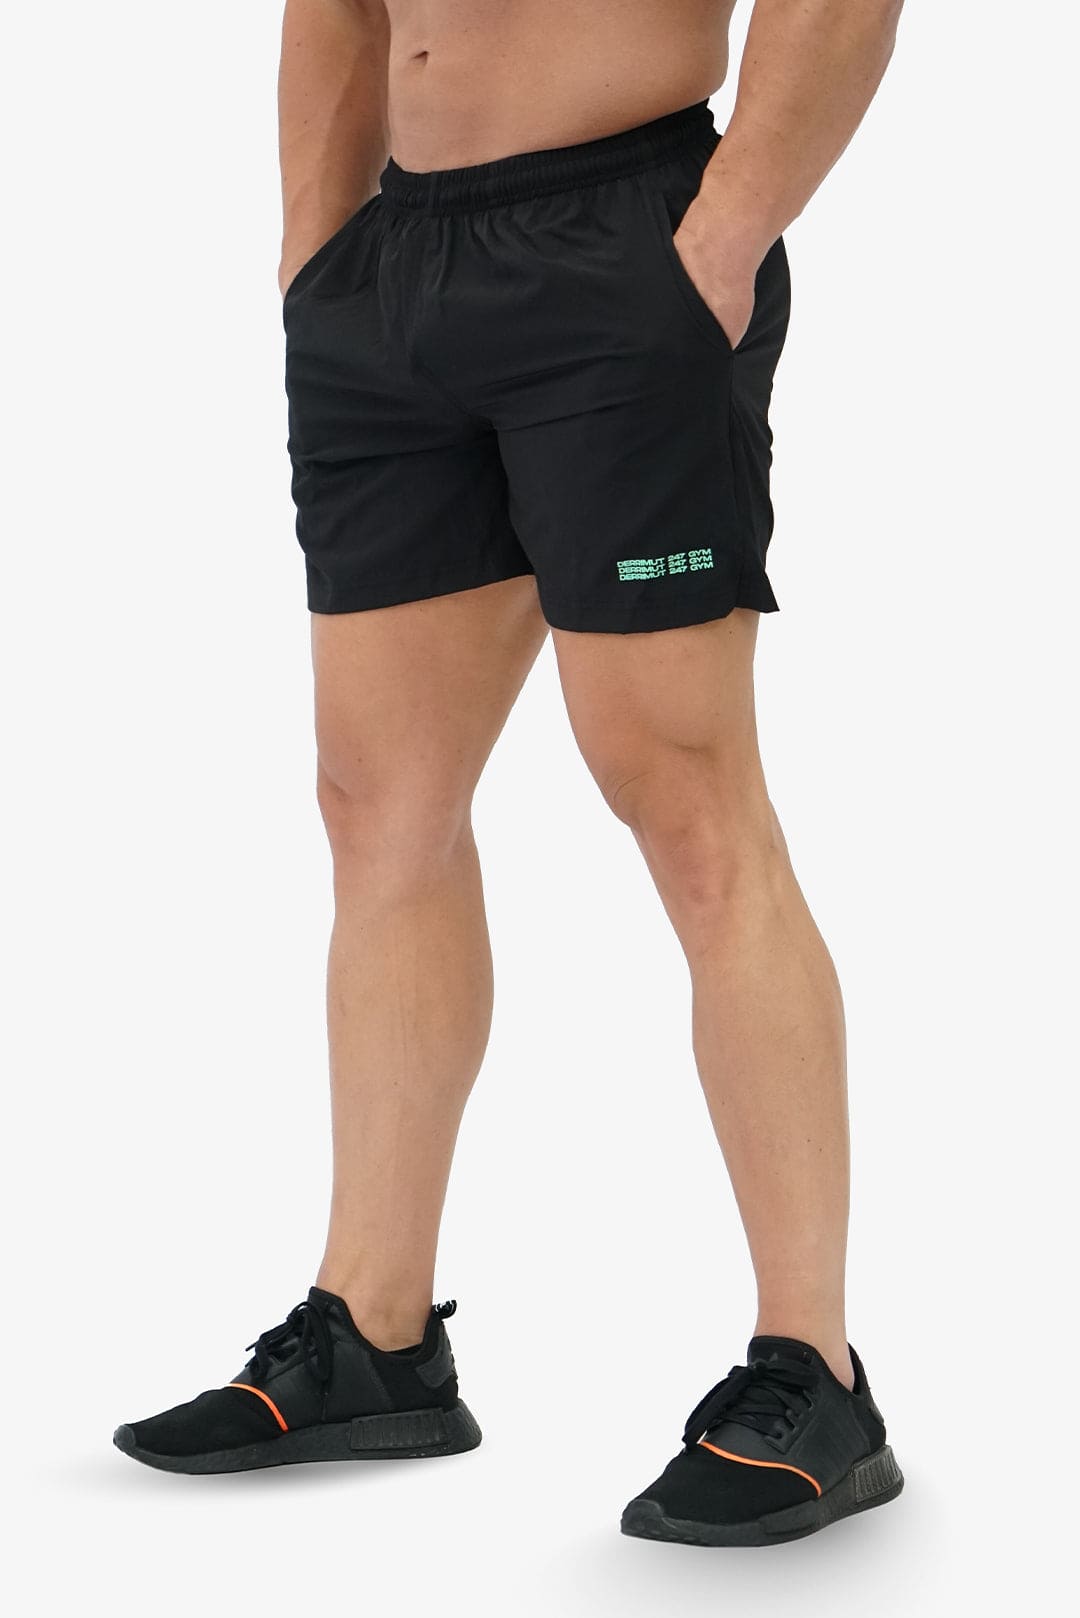 TRIPLE STACKED SHORTS -  BLACK/GREEN